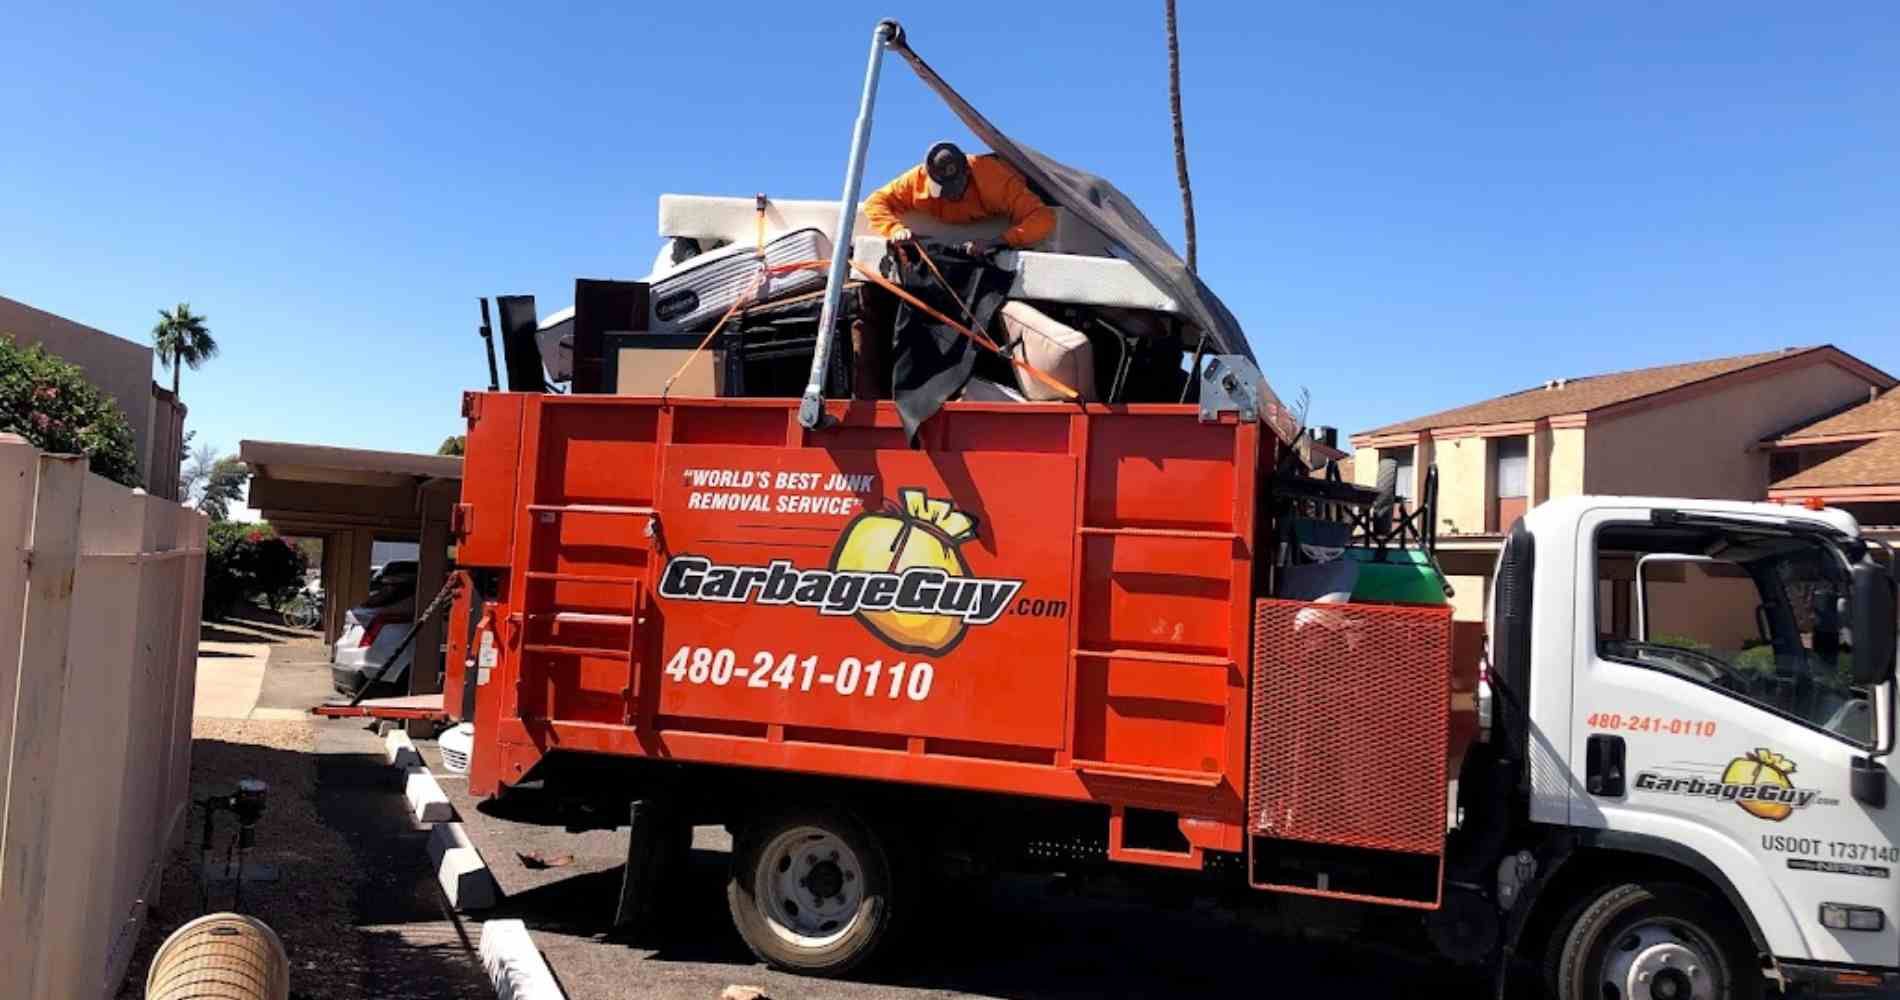 #1 for Furniture Removal in Waddell, AZ With Over 1200 5-Star Reviews!